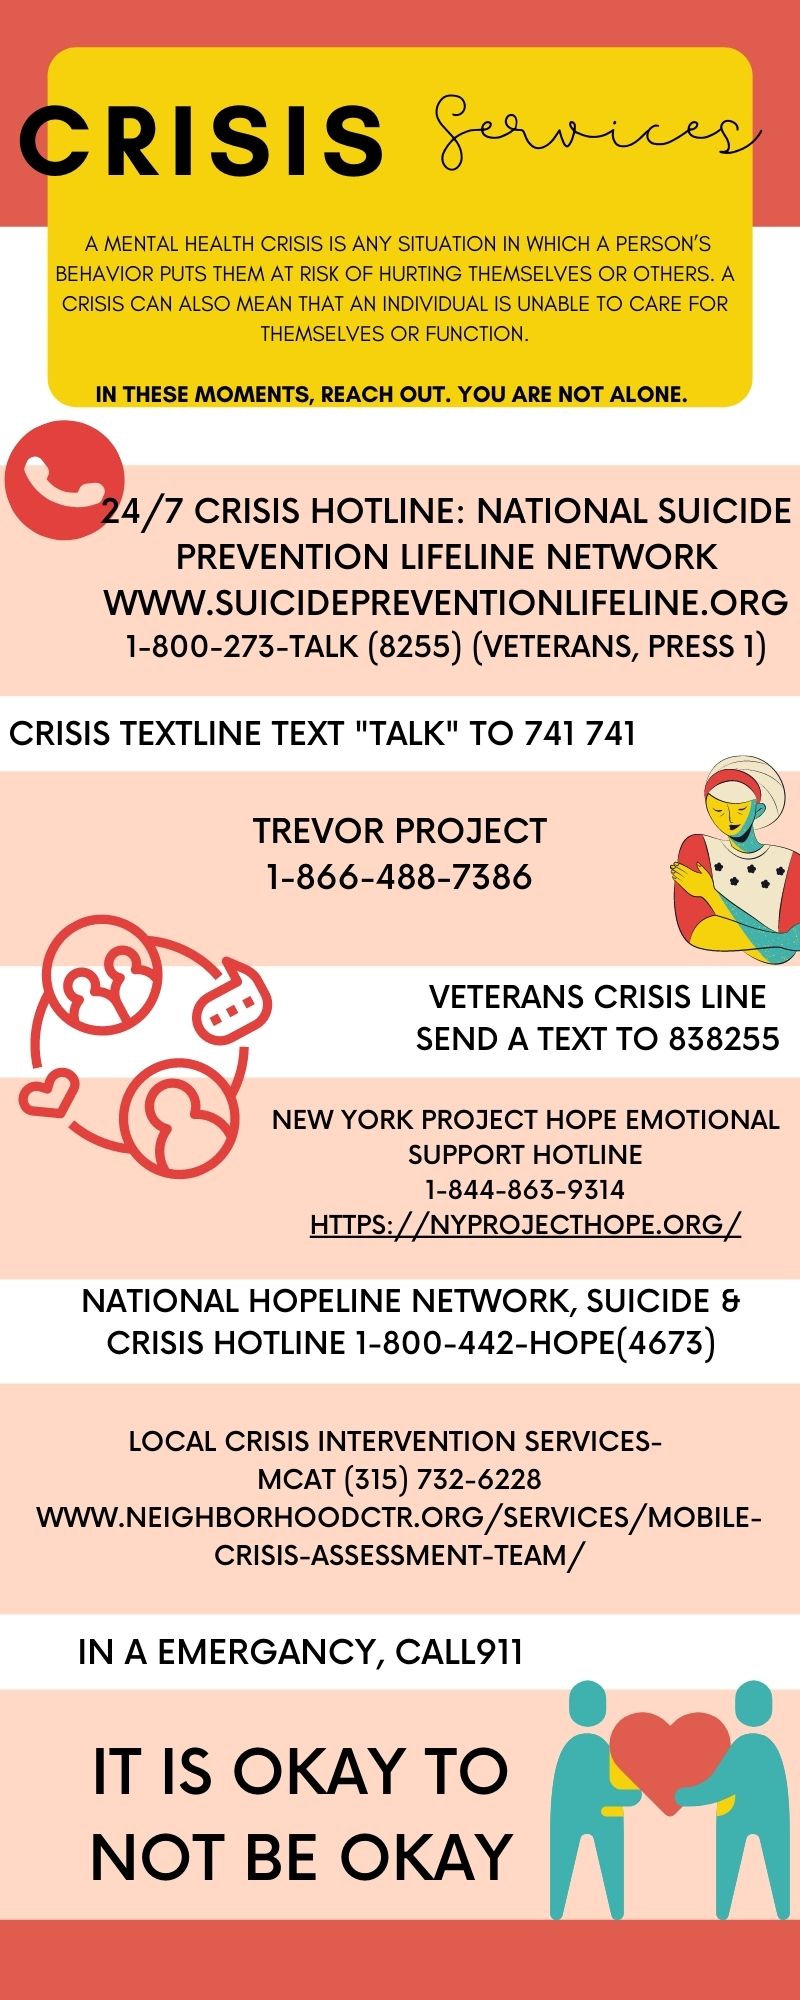 Crisis Hotline facts